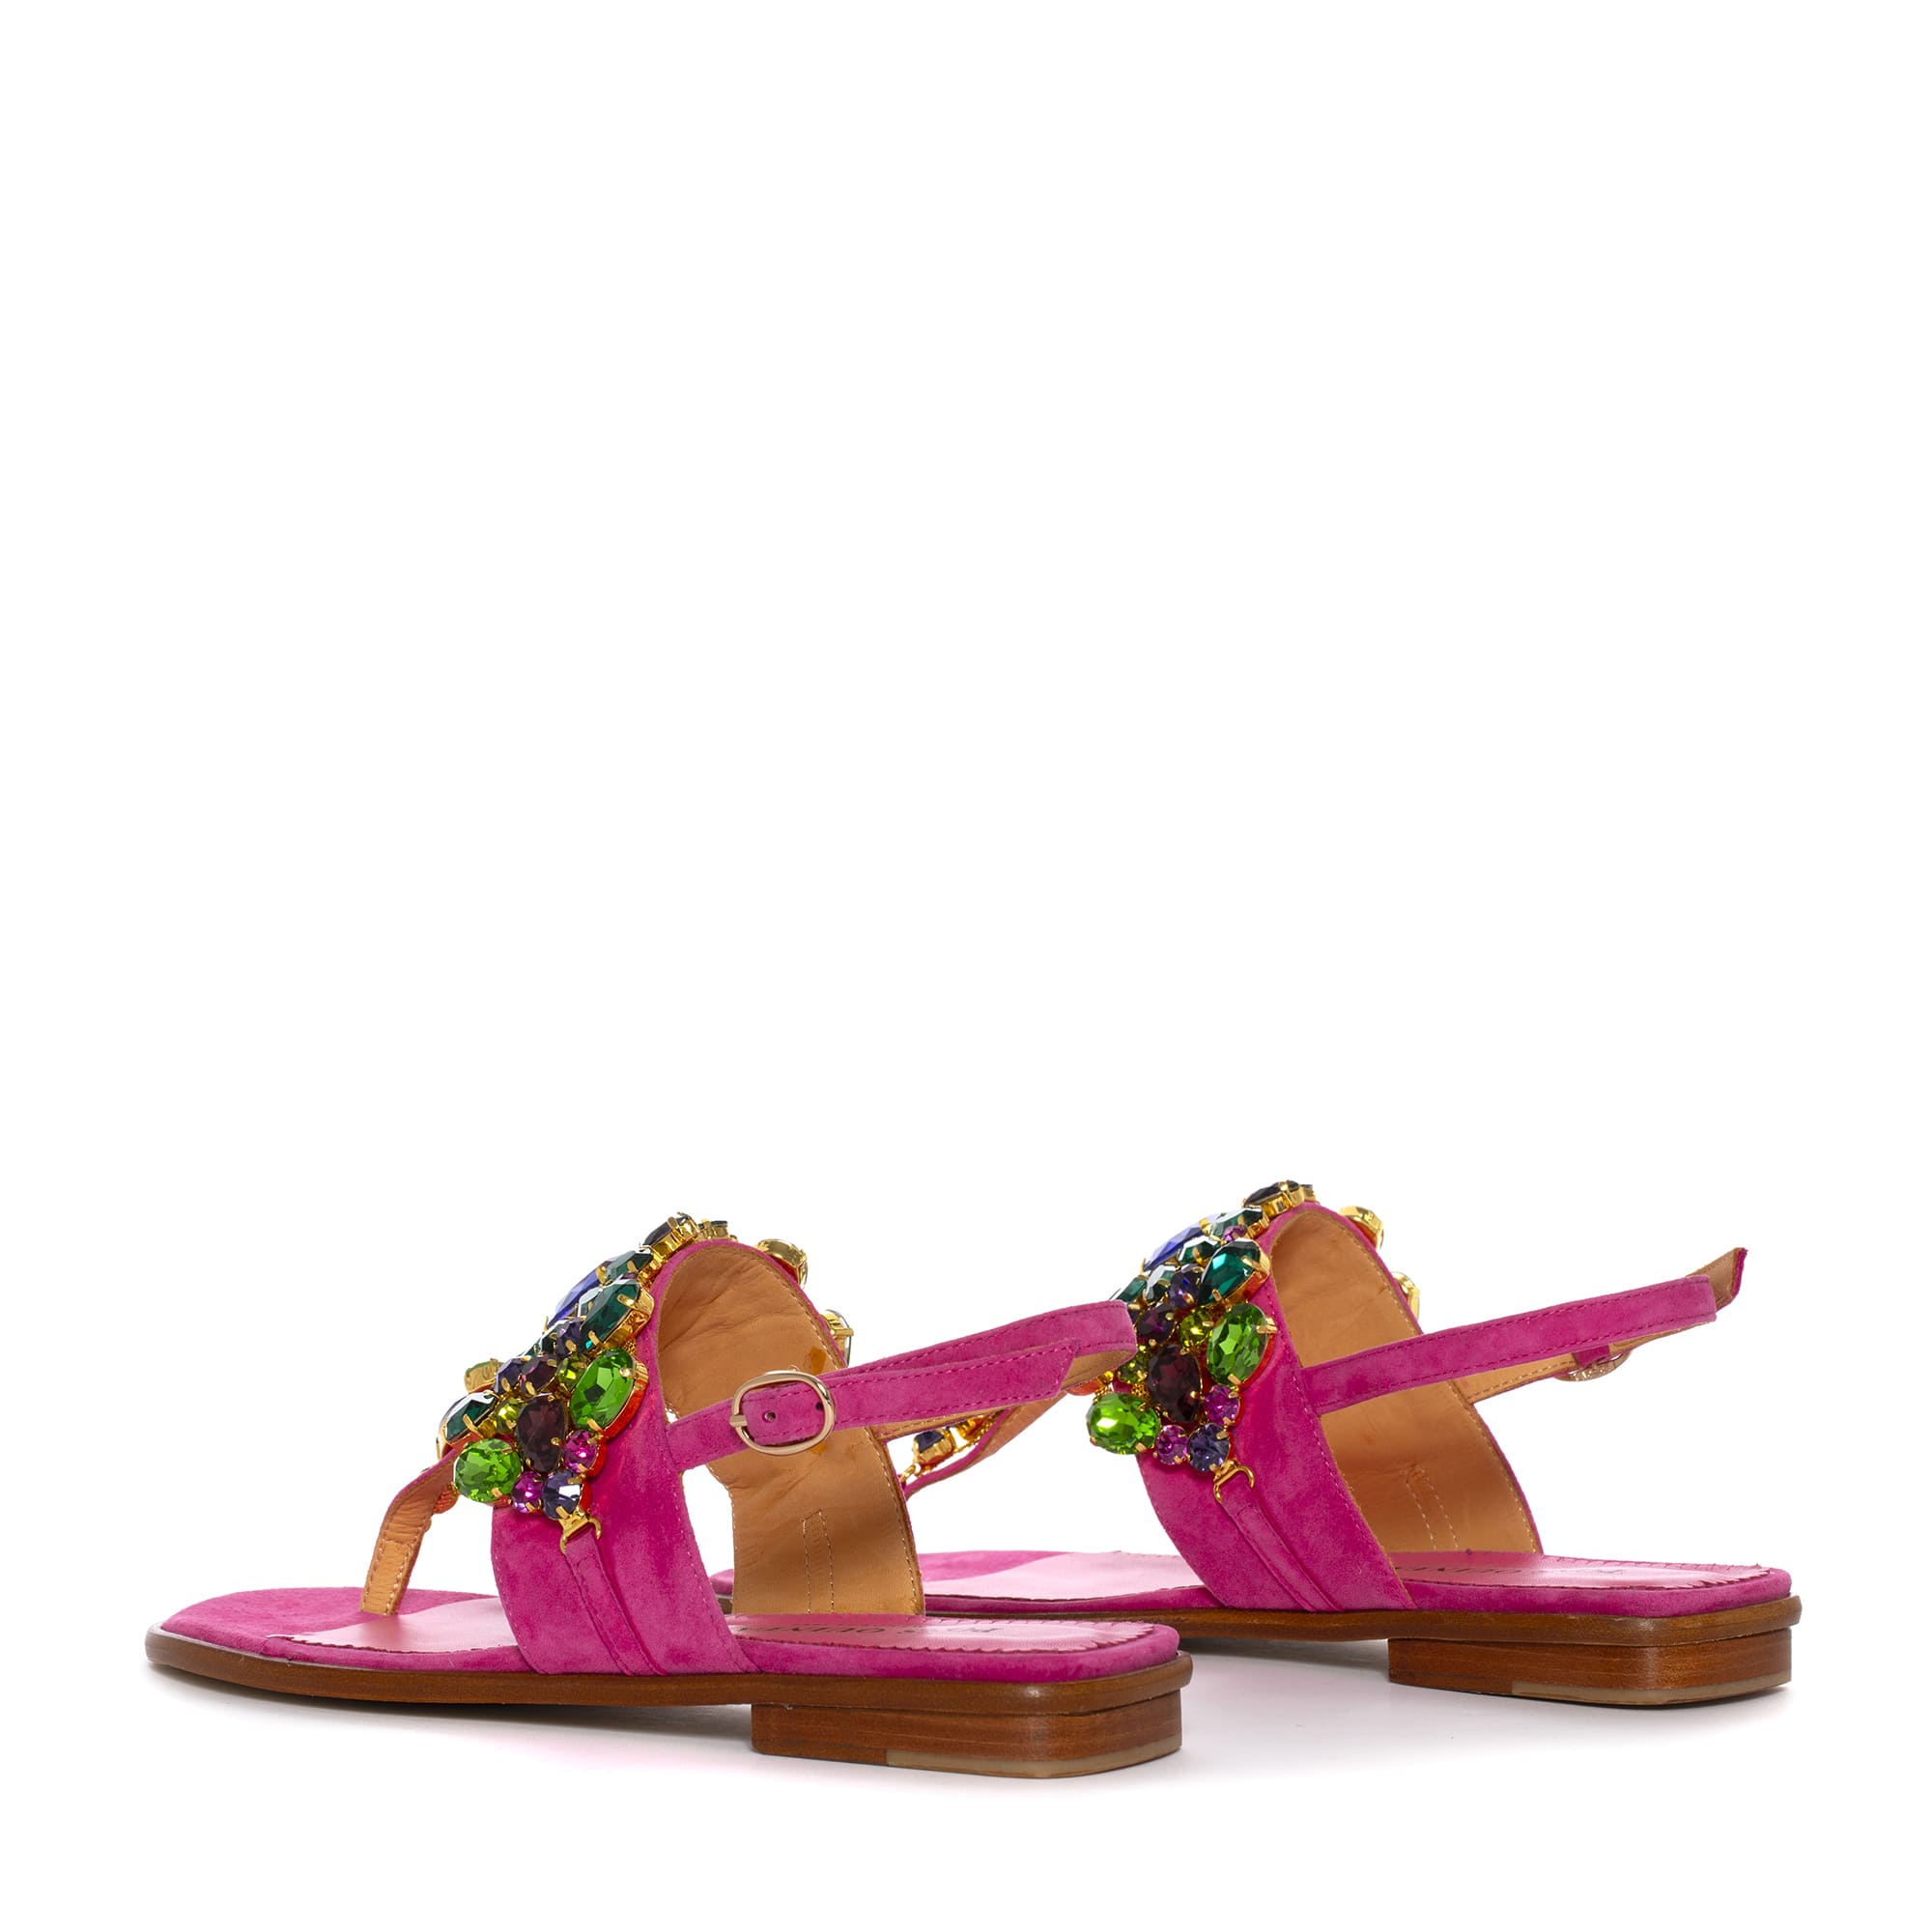 TINA FLAT SANDAL IN WET STRAWBERRY SUEDE